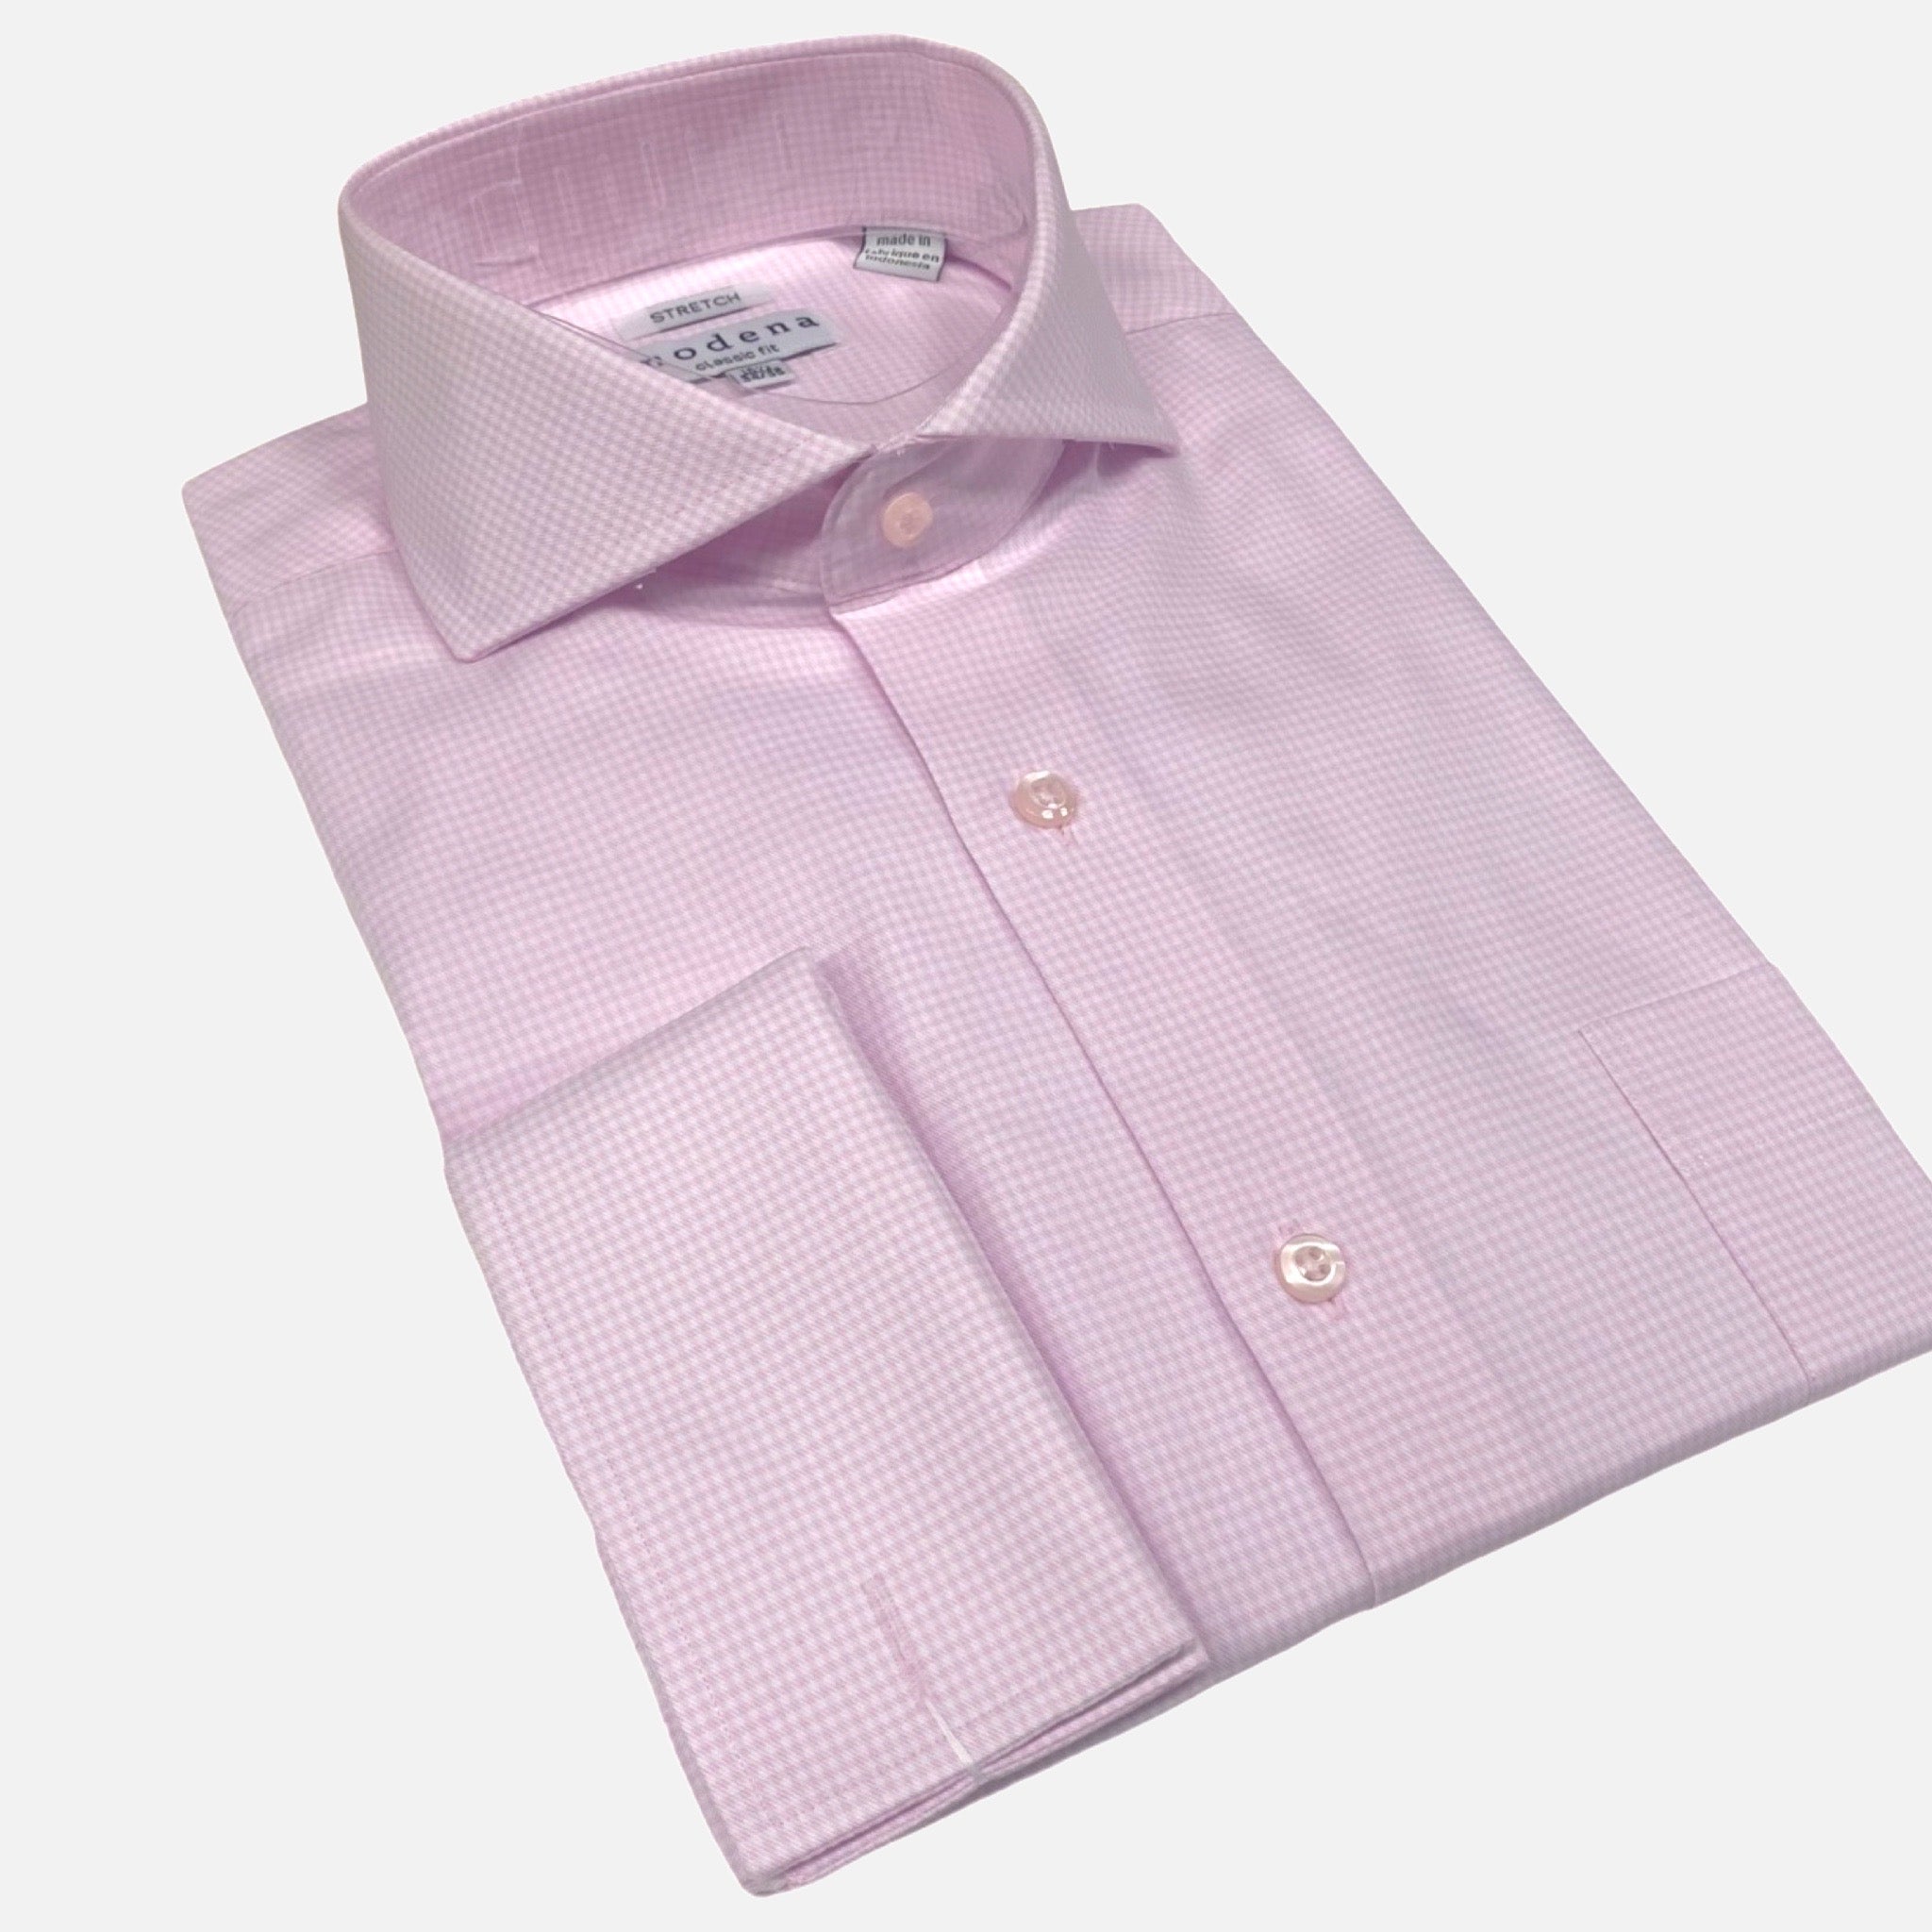 Men’s Pink Mini Check Dress Shirt with French Cuff | Classic Fit